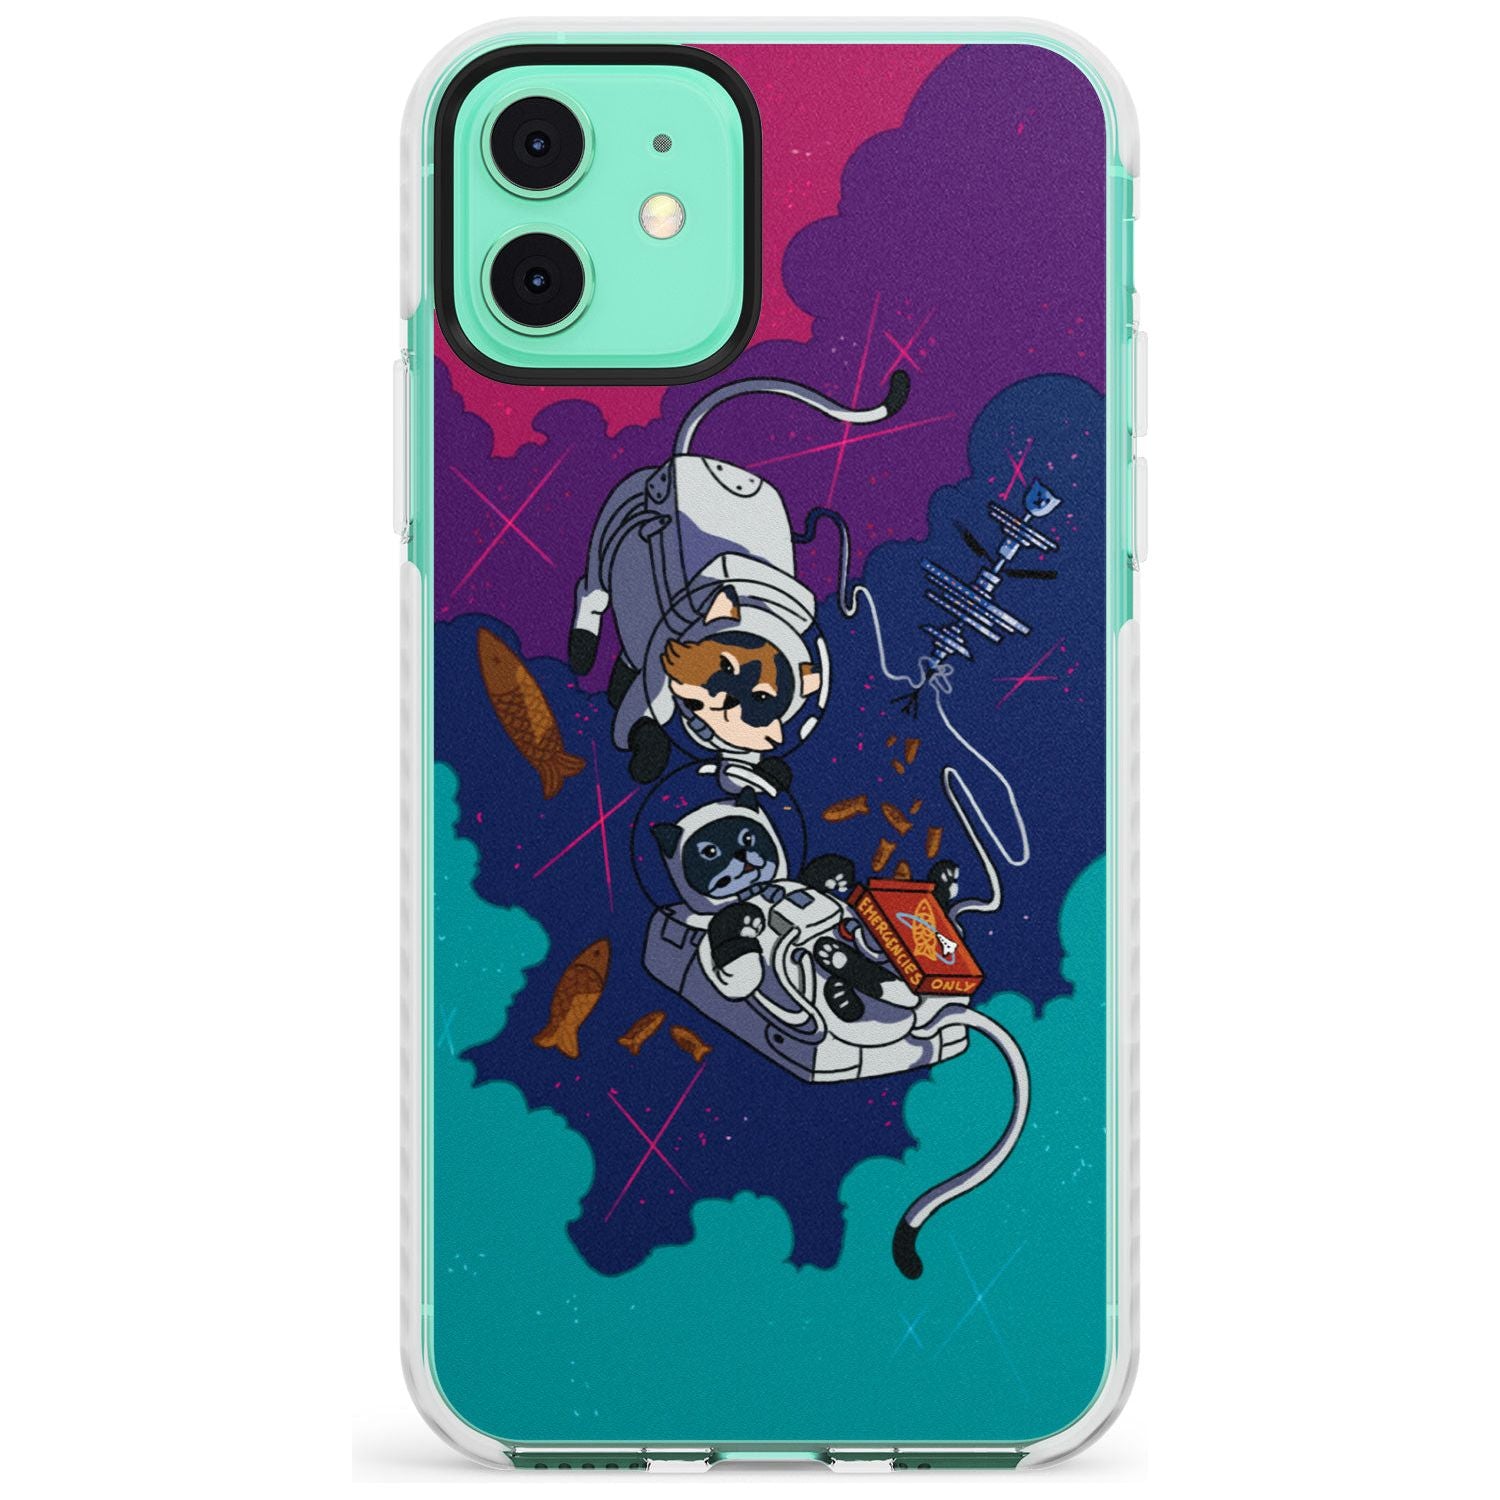 CATS IN SPACE Slim TPU Phone Case for iPhone 11